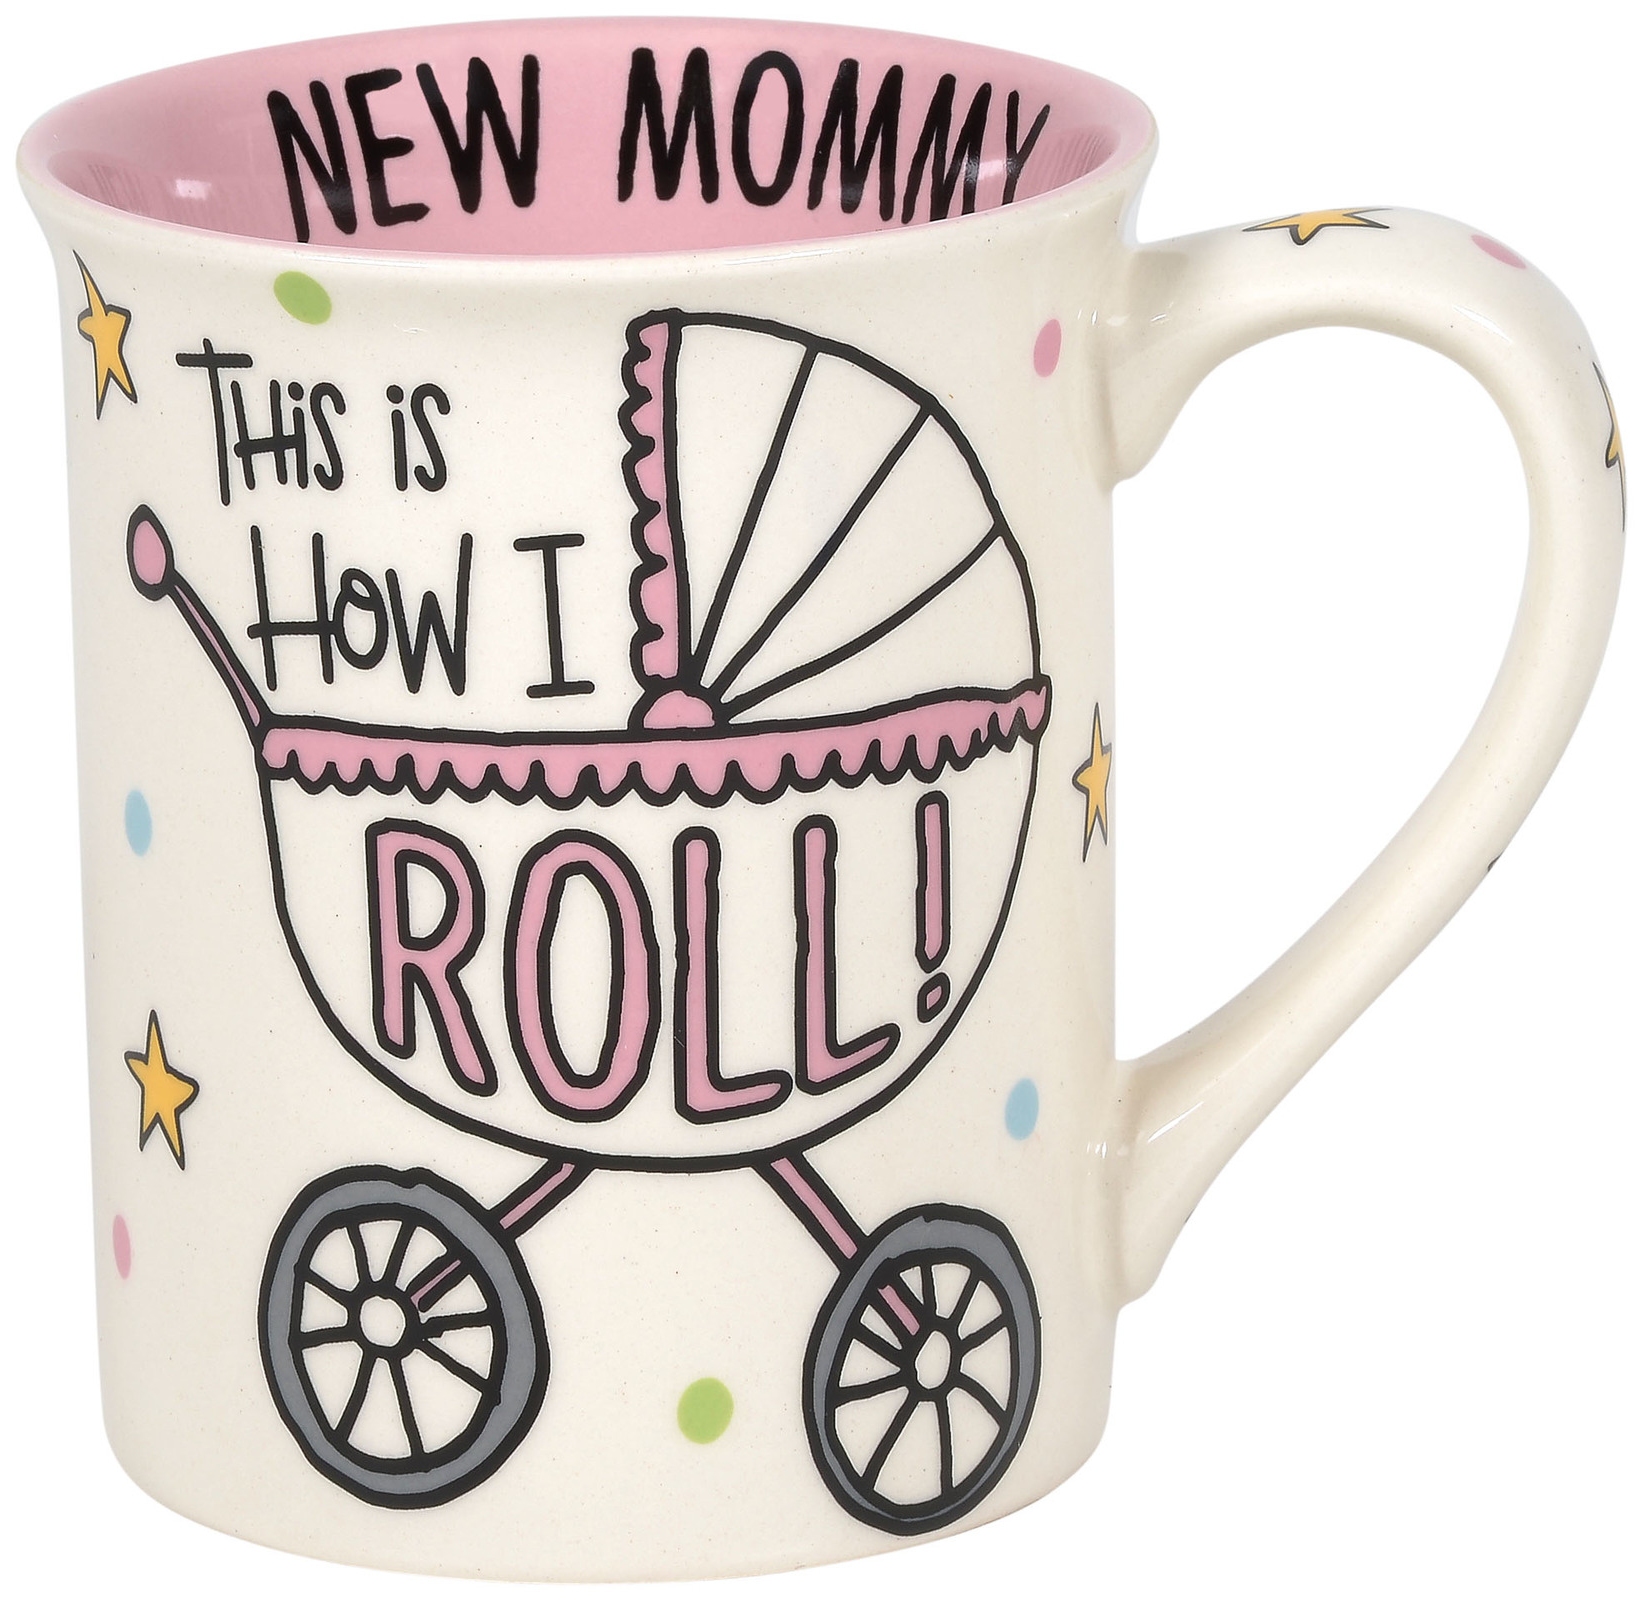 Our Name Is Mud 6006729 New Mommy Mug